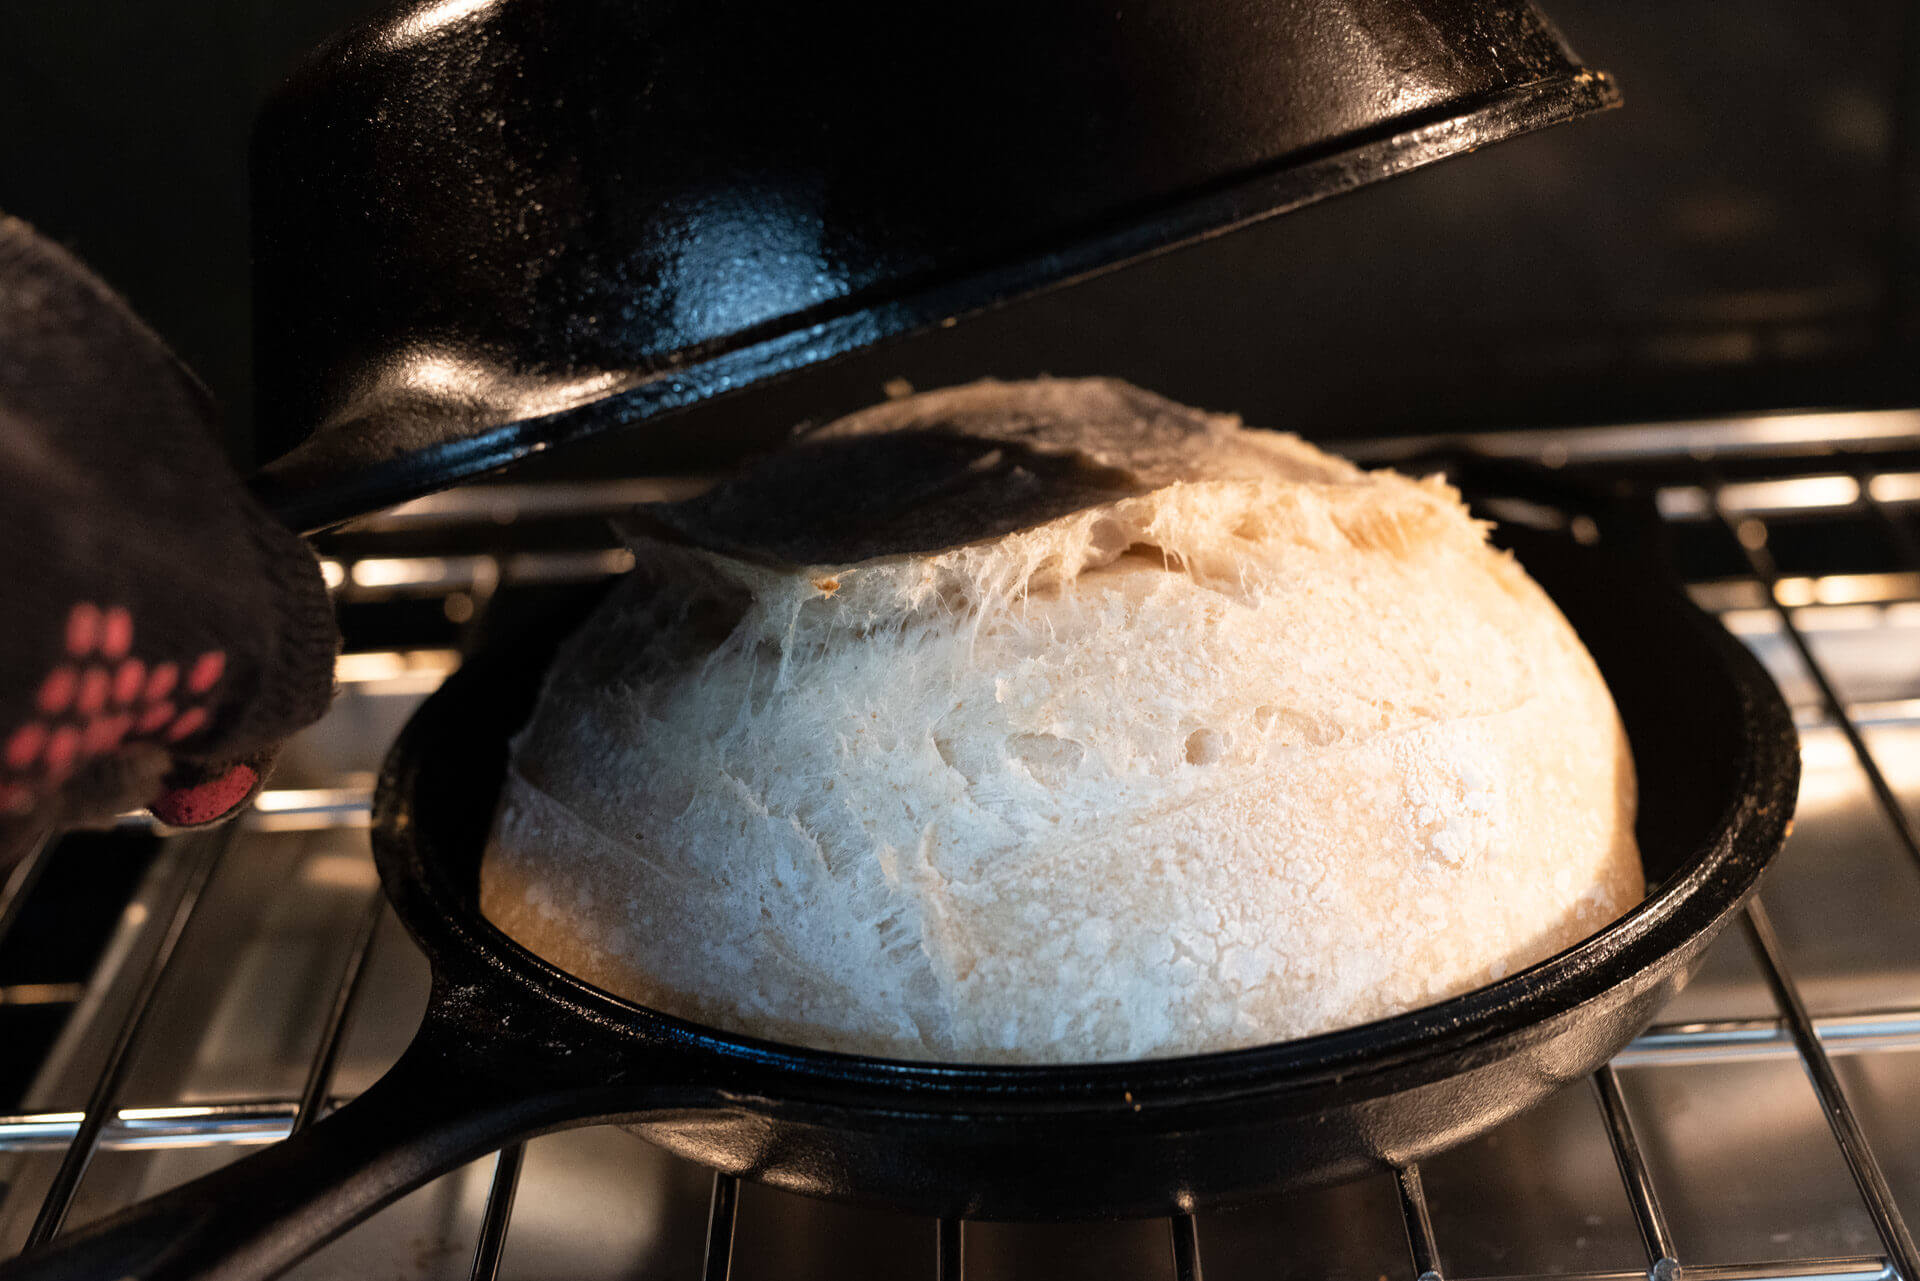 https://www.theperfectloaf.com/wp-content/uploads/2019/01/theperfectloaf-baking-bread-in-a-dutch-oven-feature-8-1920x1281.jpg